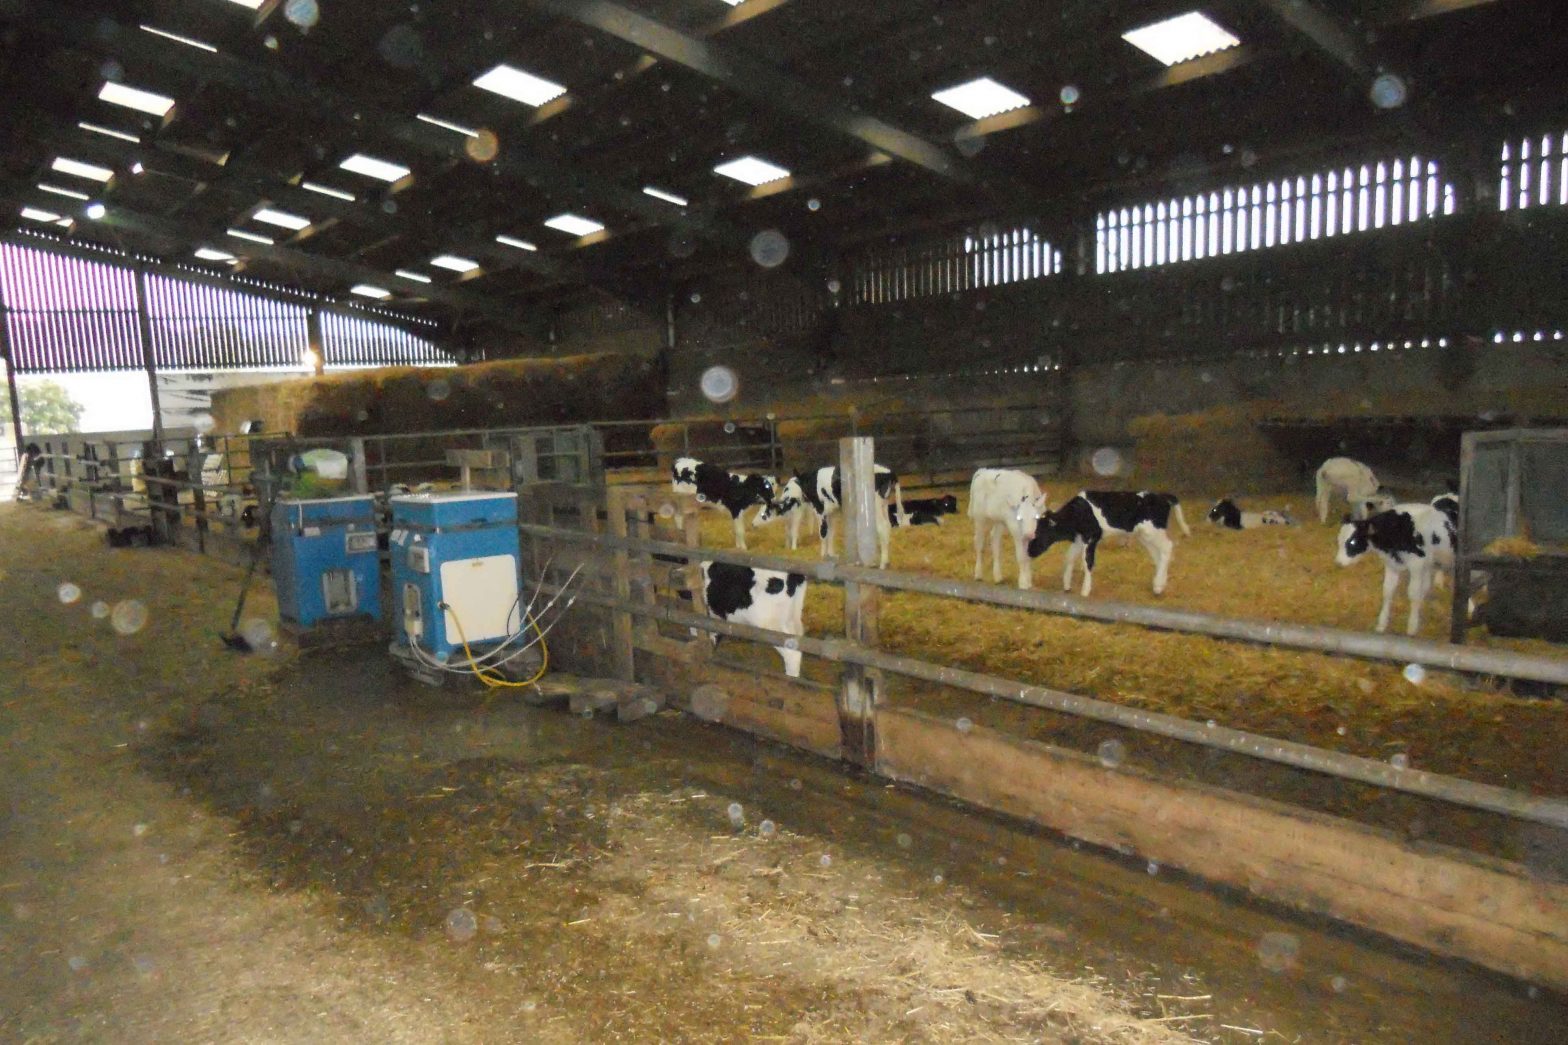 On a recent trip to Great Britain, I had the opportunity to visit a few dairy farms and learn about their youngstock programs.  All of the calves I saw were housed on bedding packs in loose housing with open sidewall buildings.